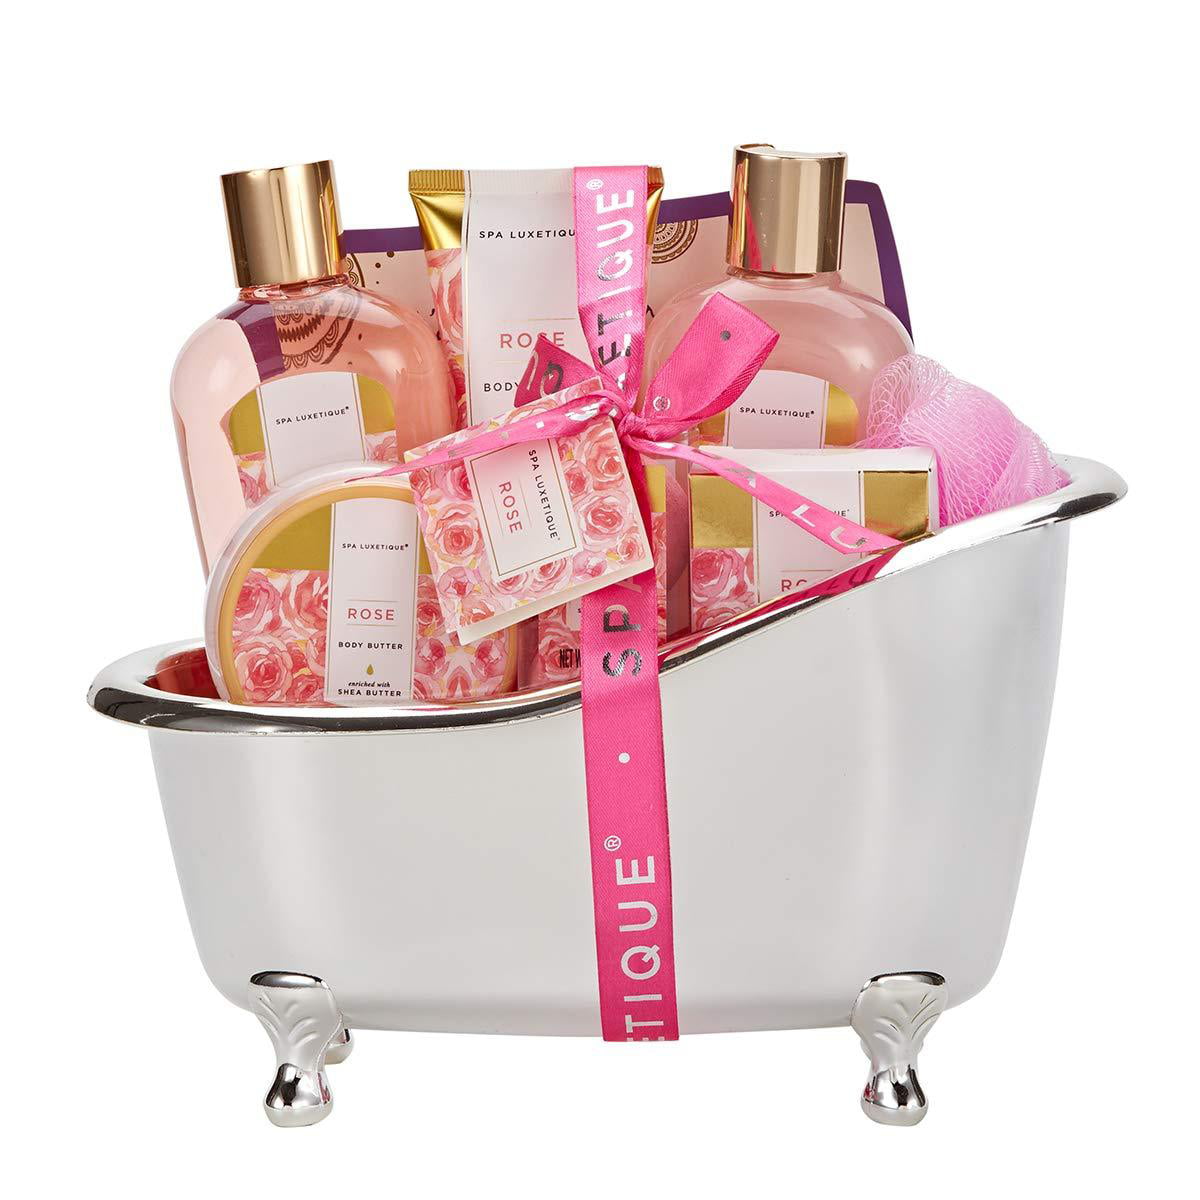 Spa Luxetique Spa Gift Basket Rose Fragrance Premium Pc Gift Baskets